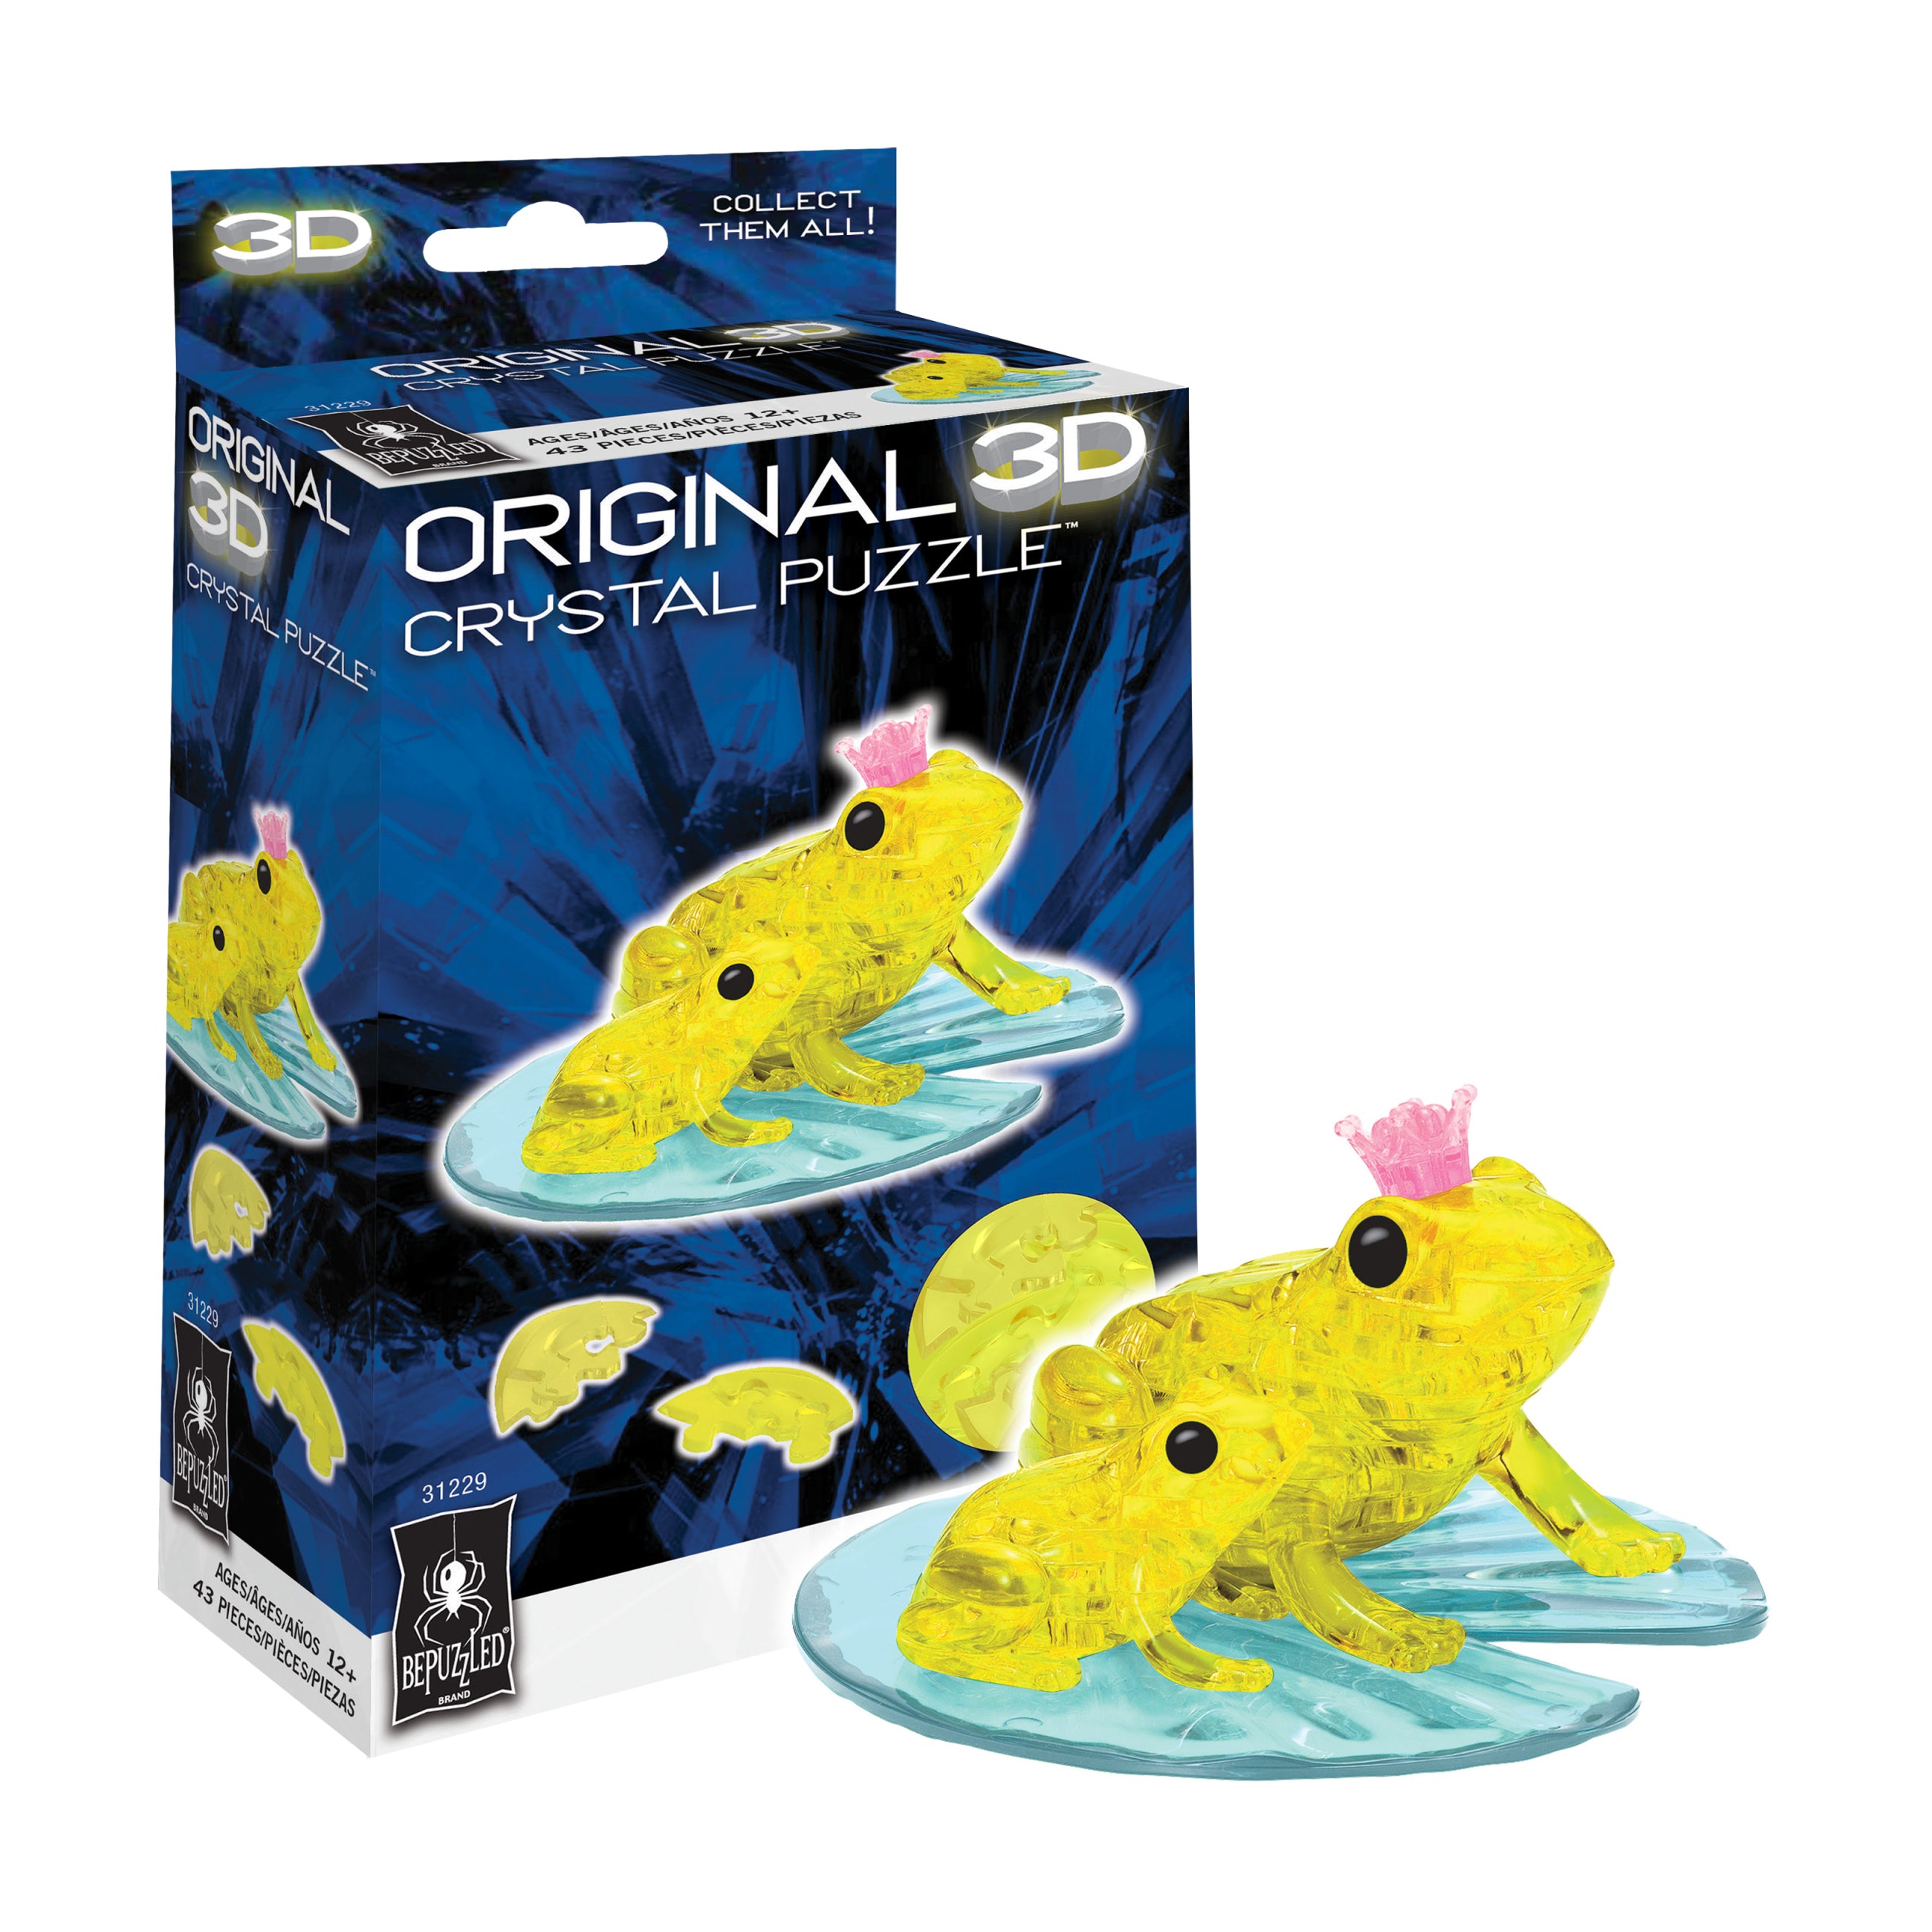 Bepuzzled | Frog Original 3D Crystal Puzzle, Ages 12 and Up